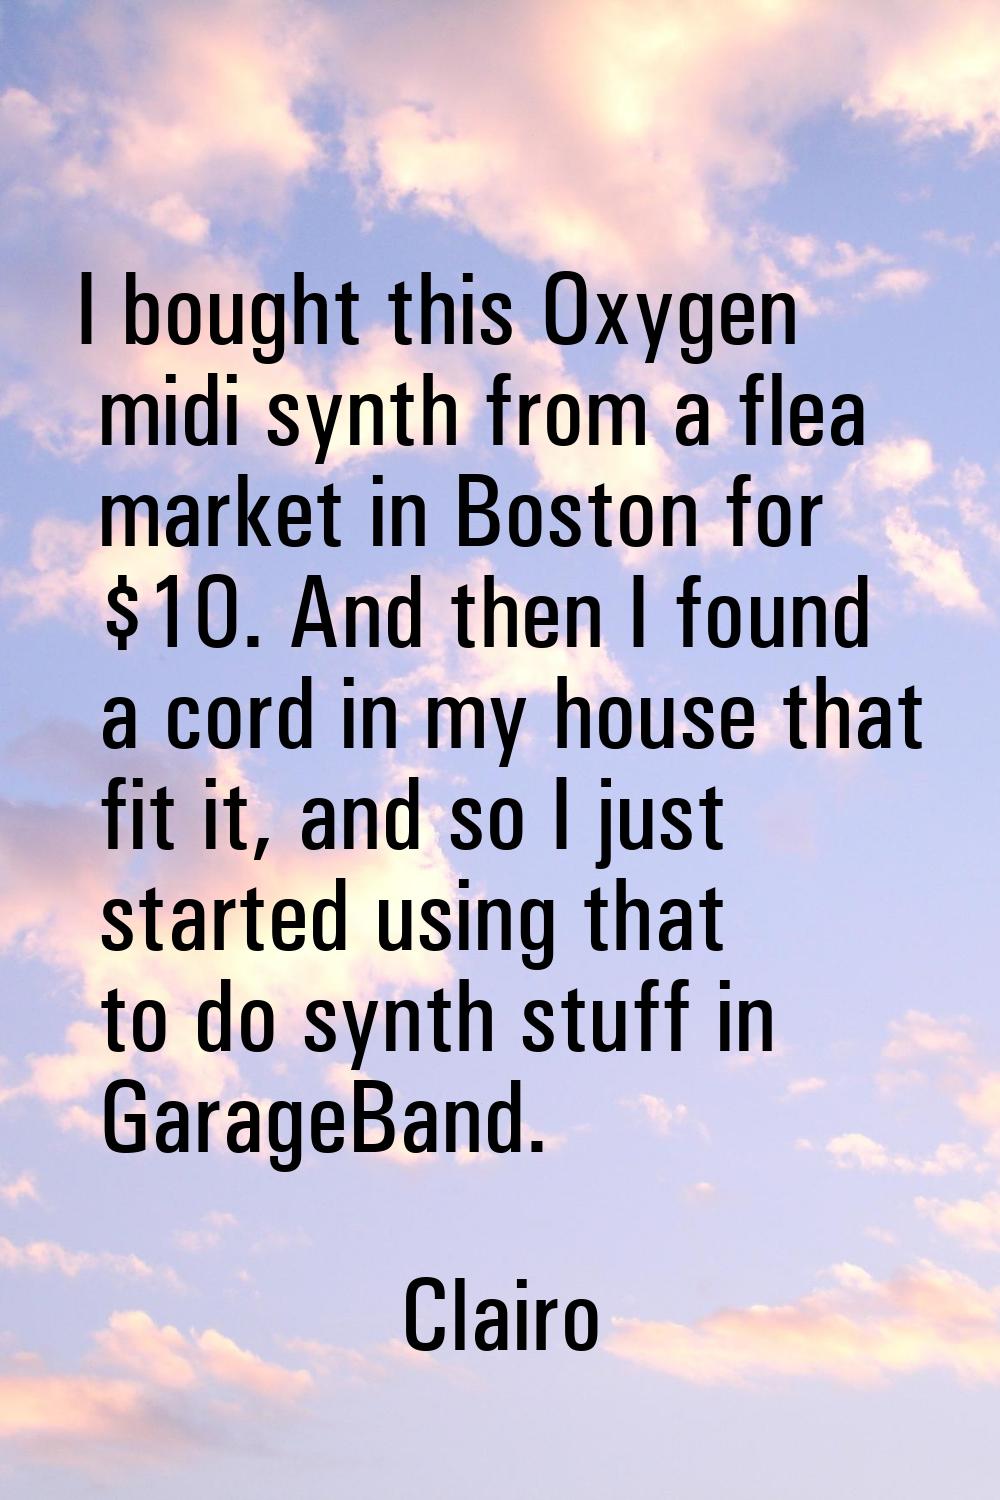 I bought this Oxygen midi synth from a flea market in Boston for $10. And then I found a cord in my